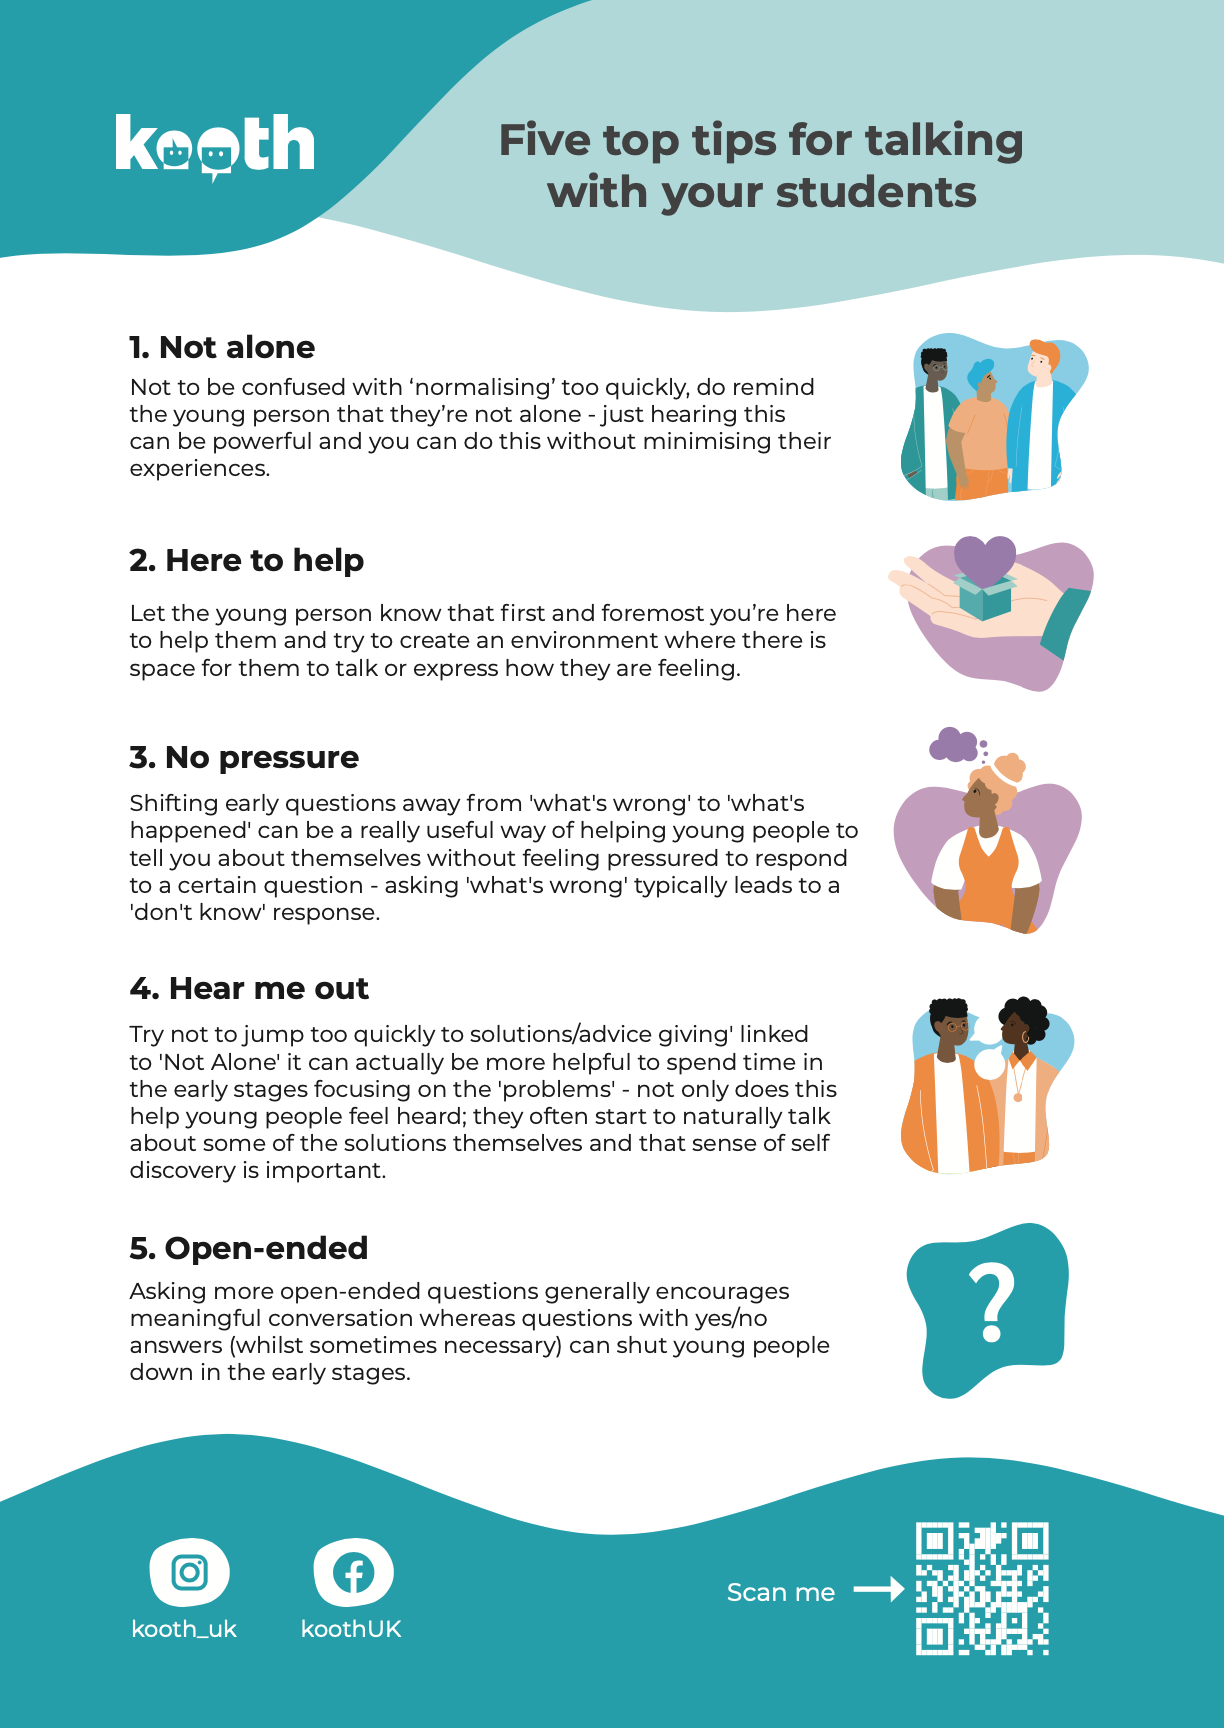 Five Top Tips for Talking with Your Students